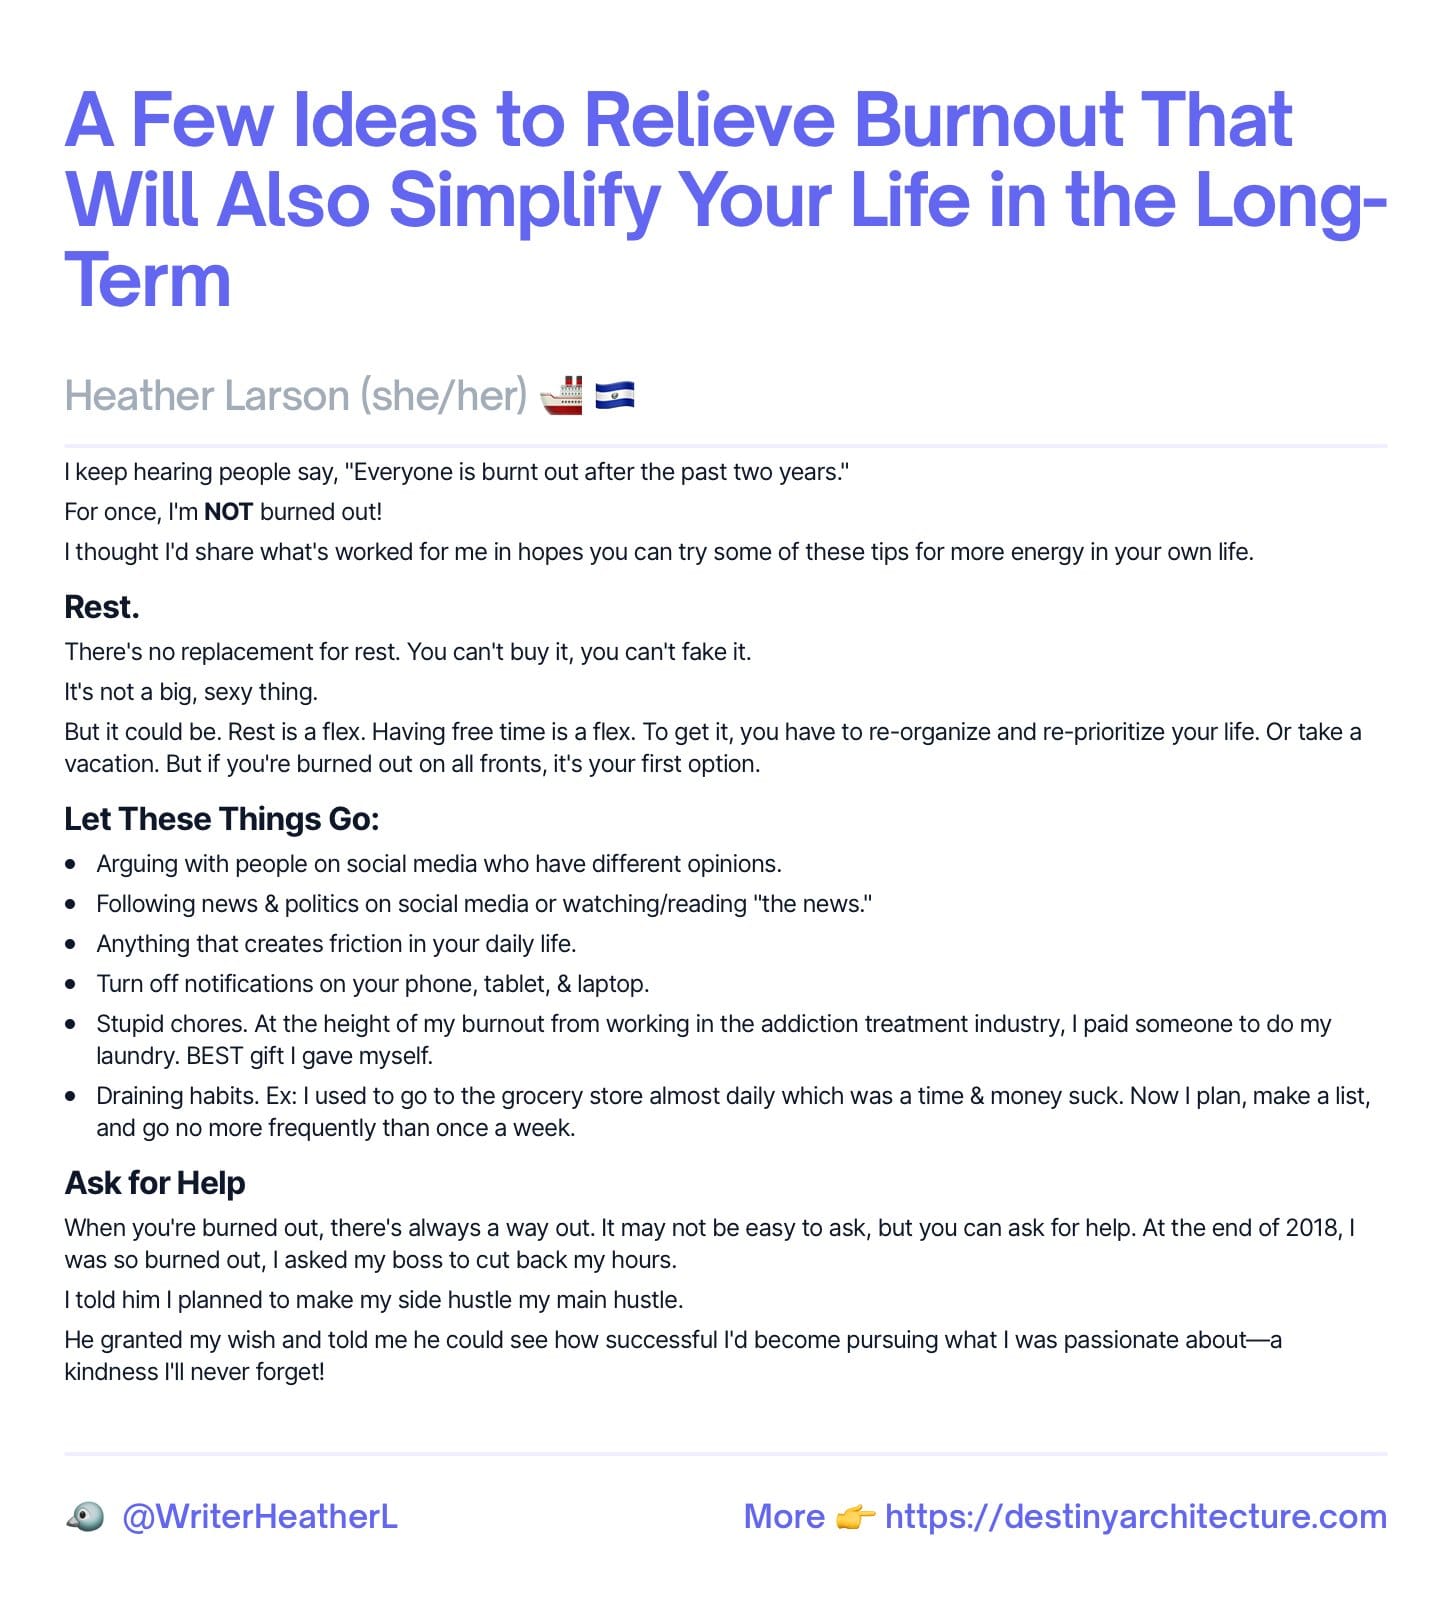 How To Avoid Burnout with a Few Simple Changes You Can Make Today